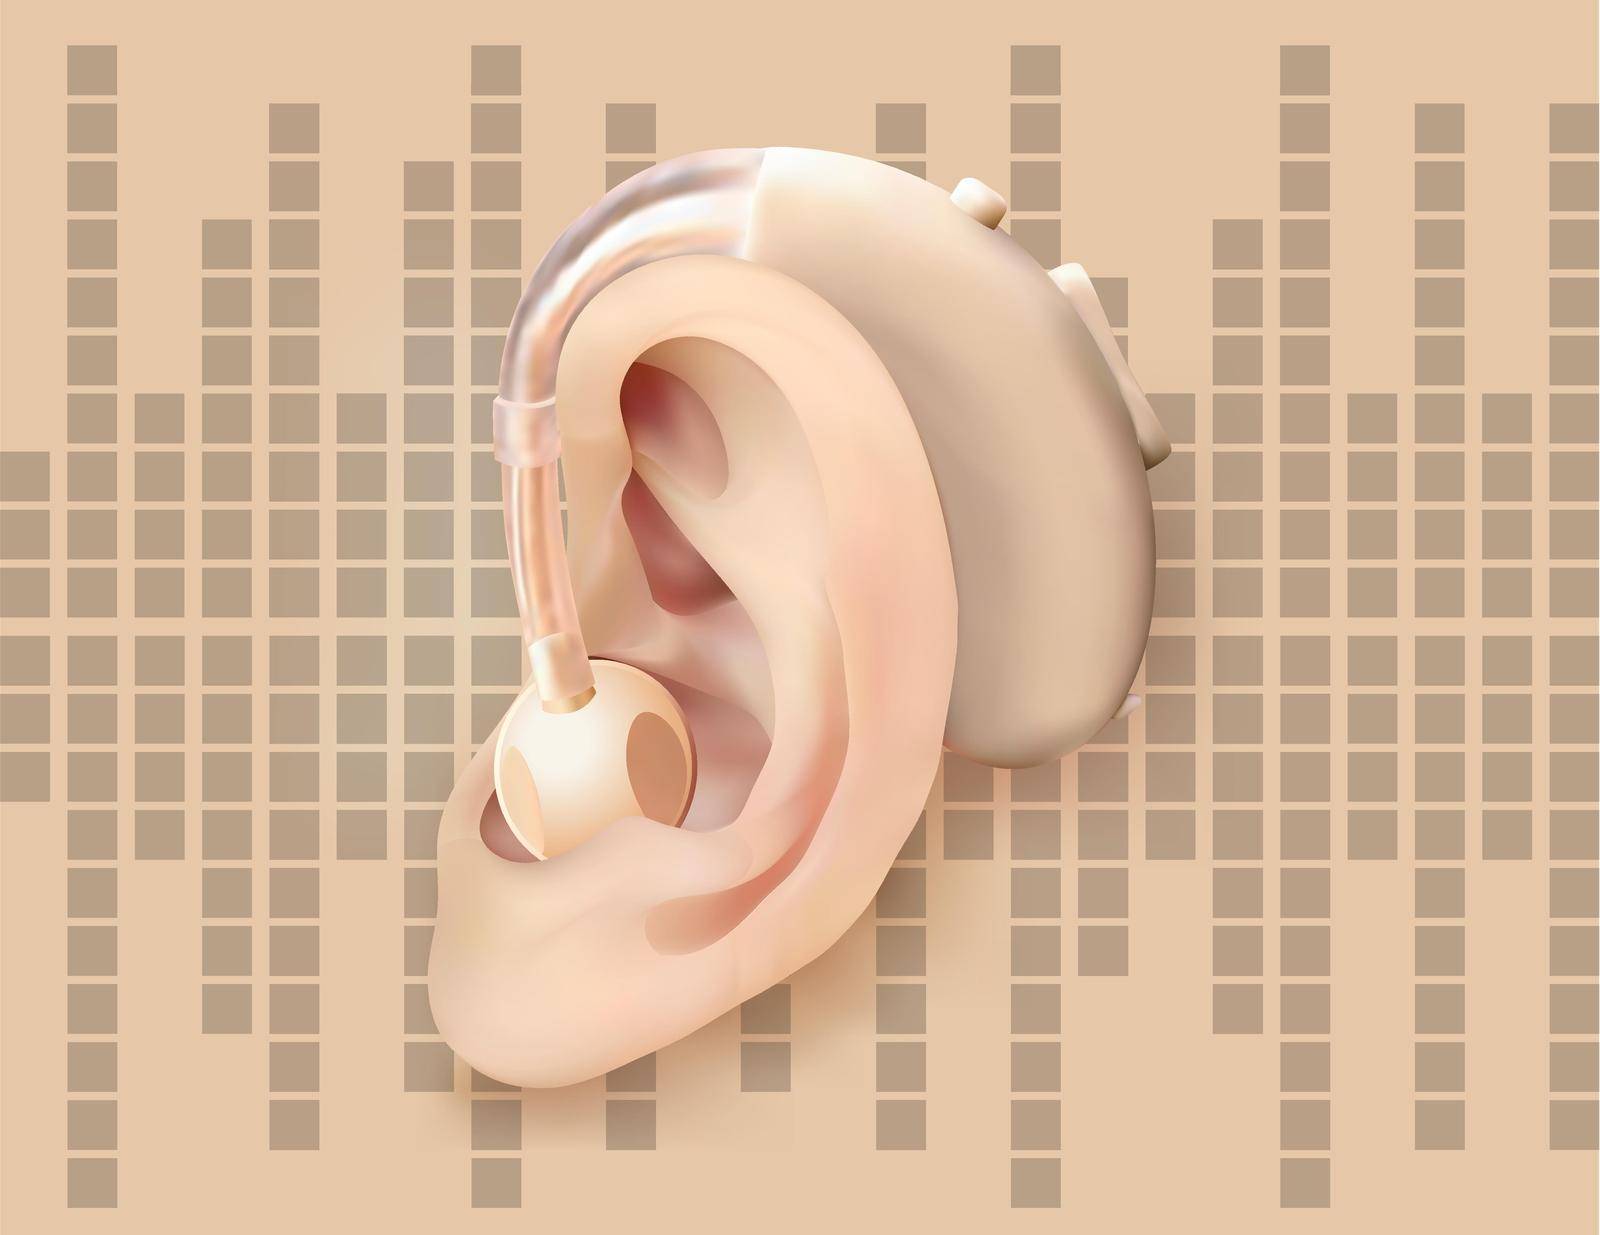 Digital hearing aid behind the ear, on background of sound wave diagram. Treatment and prosthetics of hearing loss in otolaryngology. Realistic vector illustration. Medicine and health.